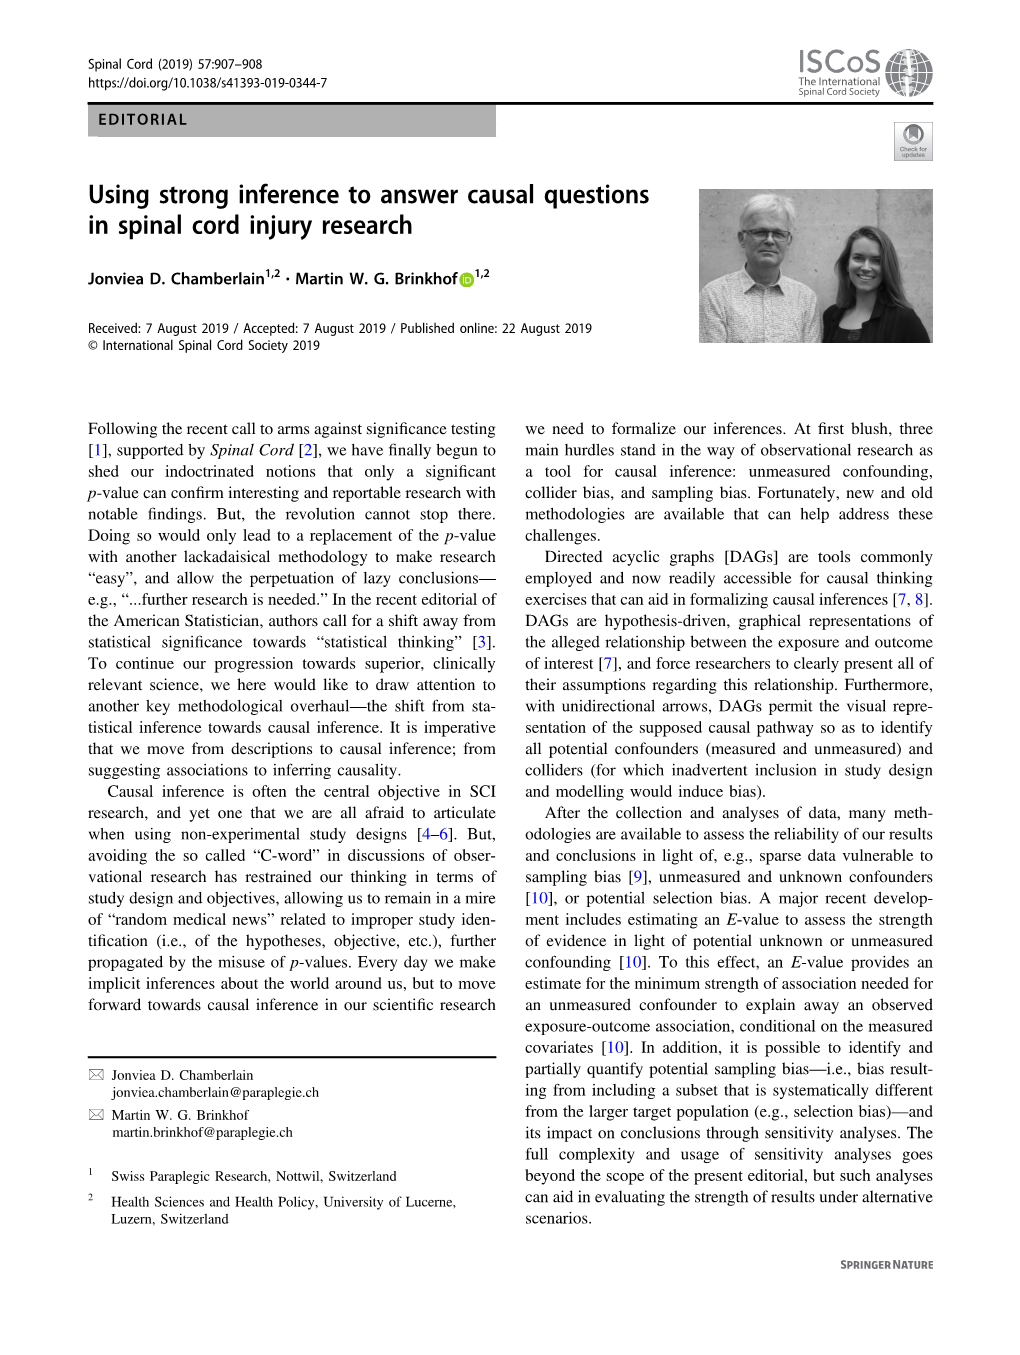 Using Strong Inference to Answer Causal Questions in Spinal Cord Injury Research